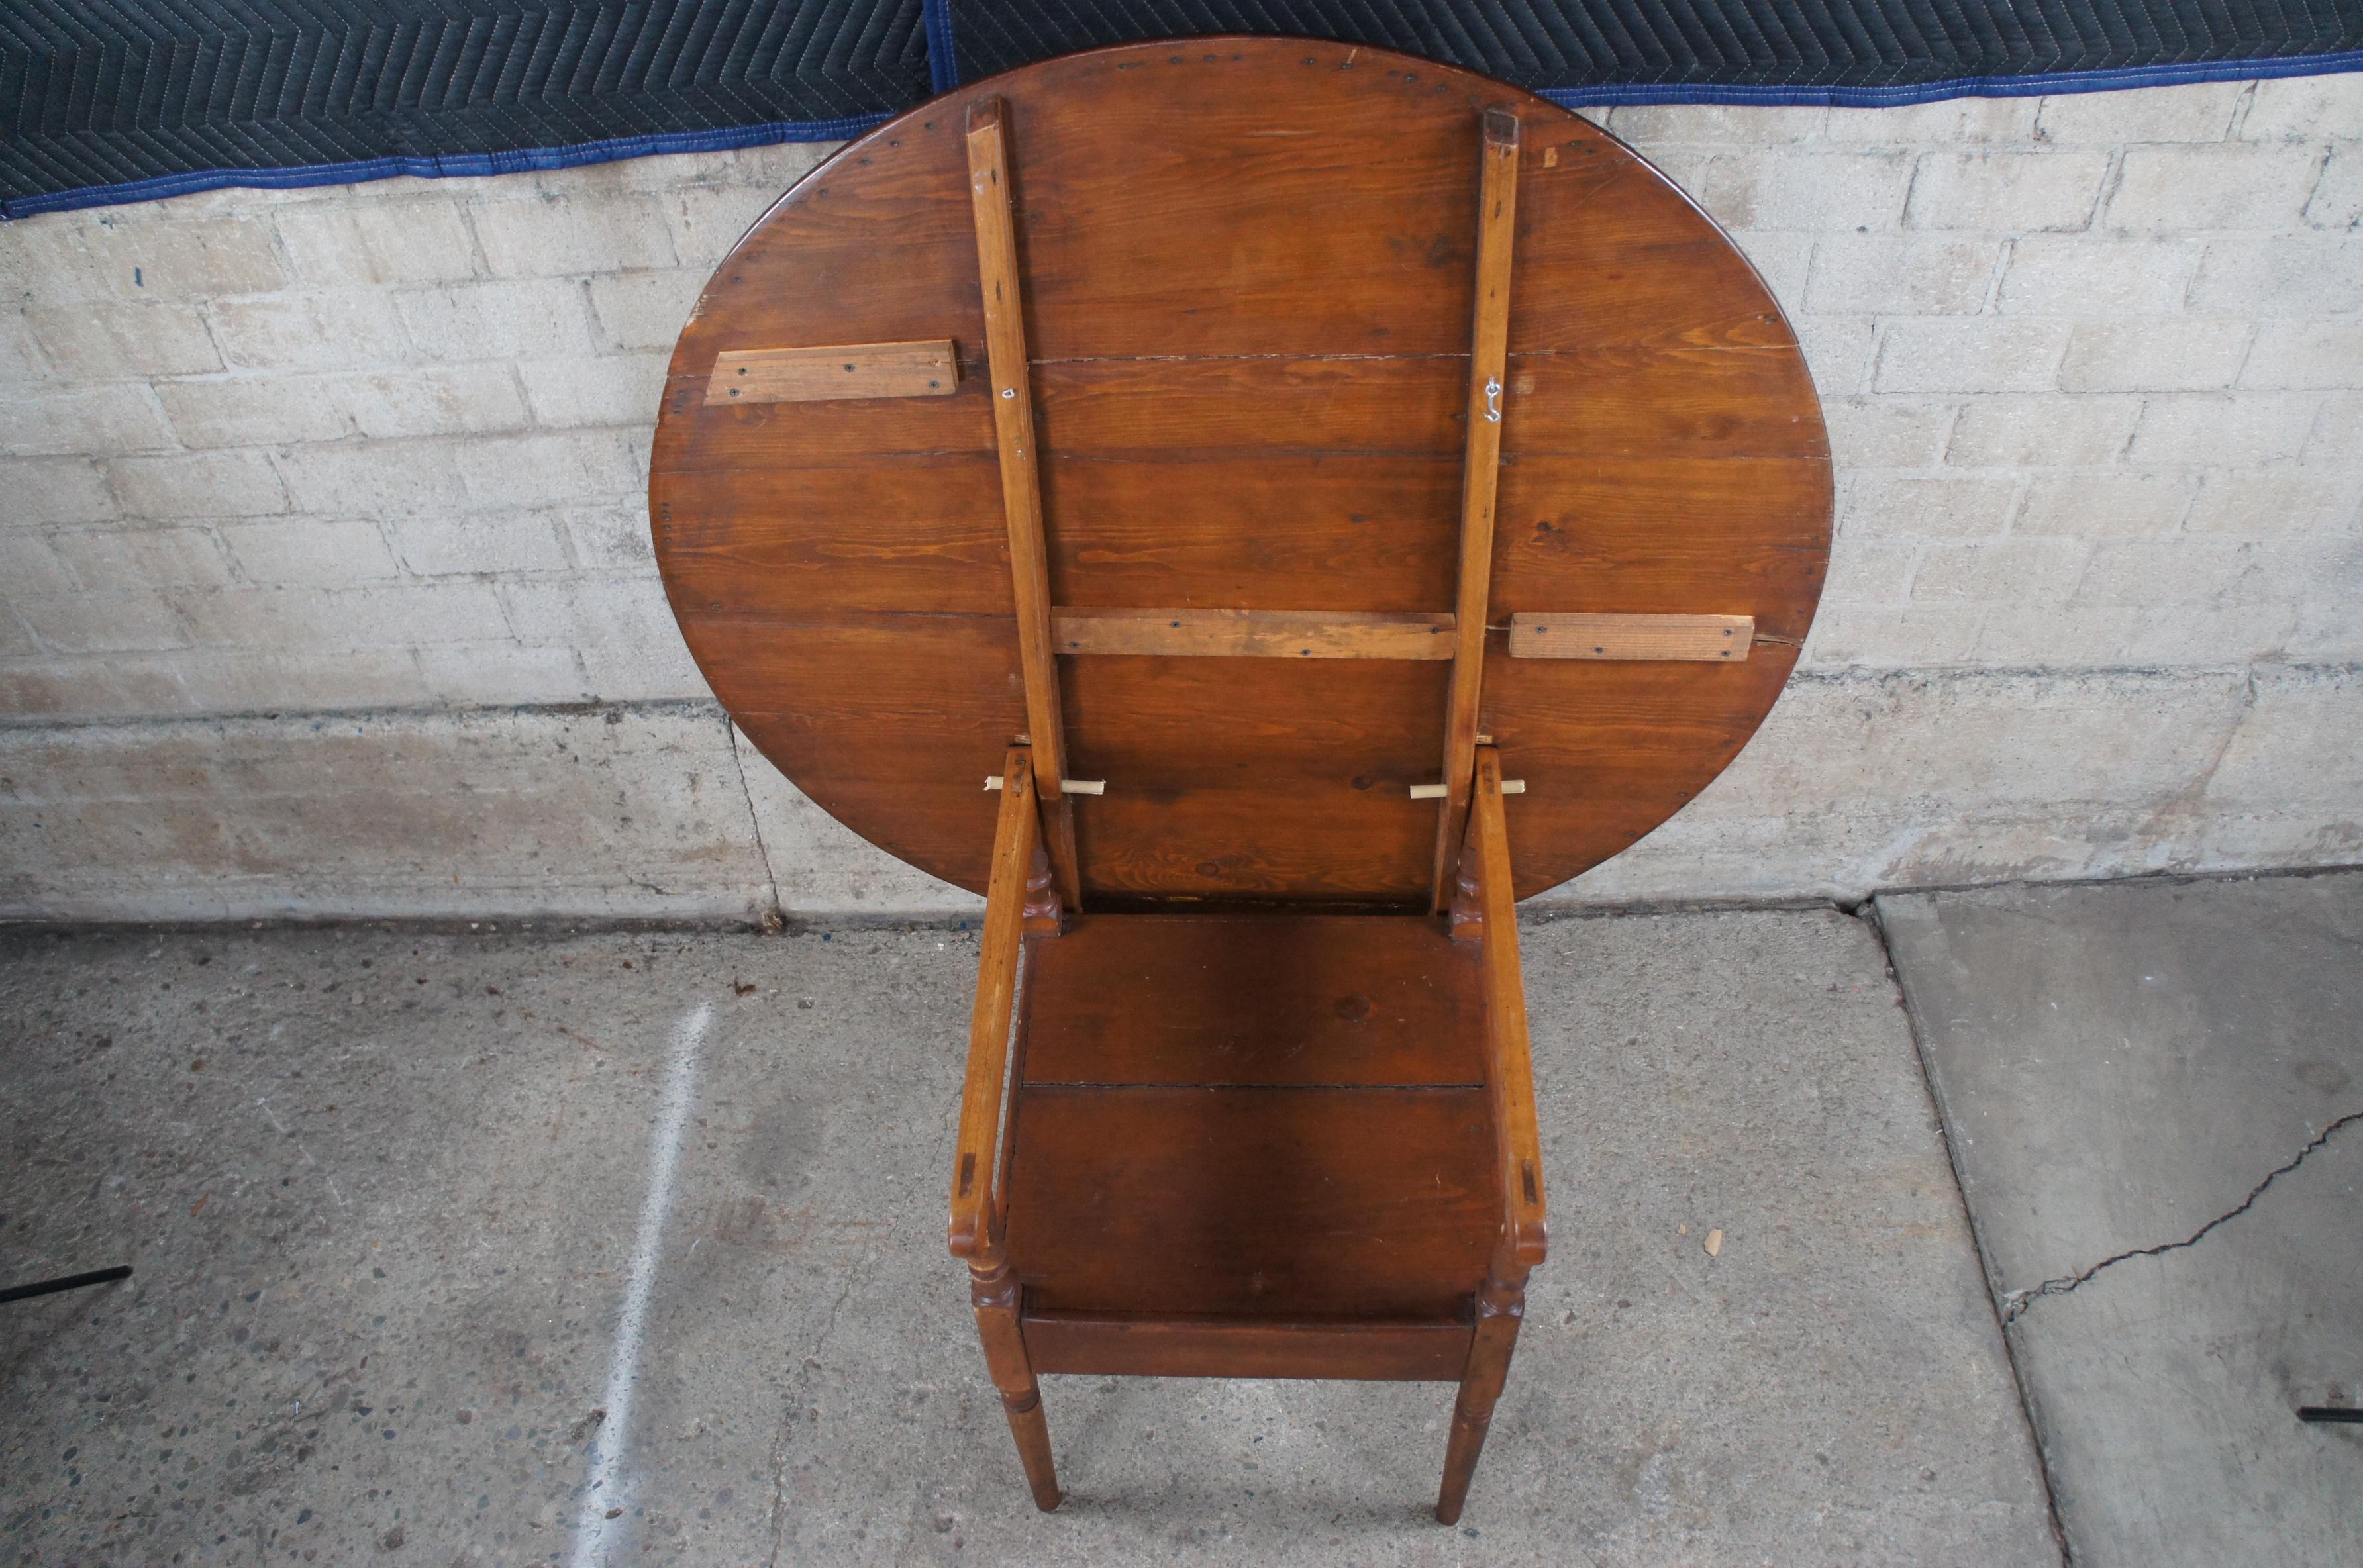 American Classical Antique Early American Colonial Pine Round Tilt Top Tavern Table Chair Bench